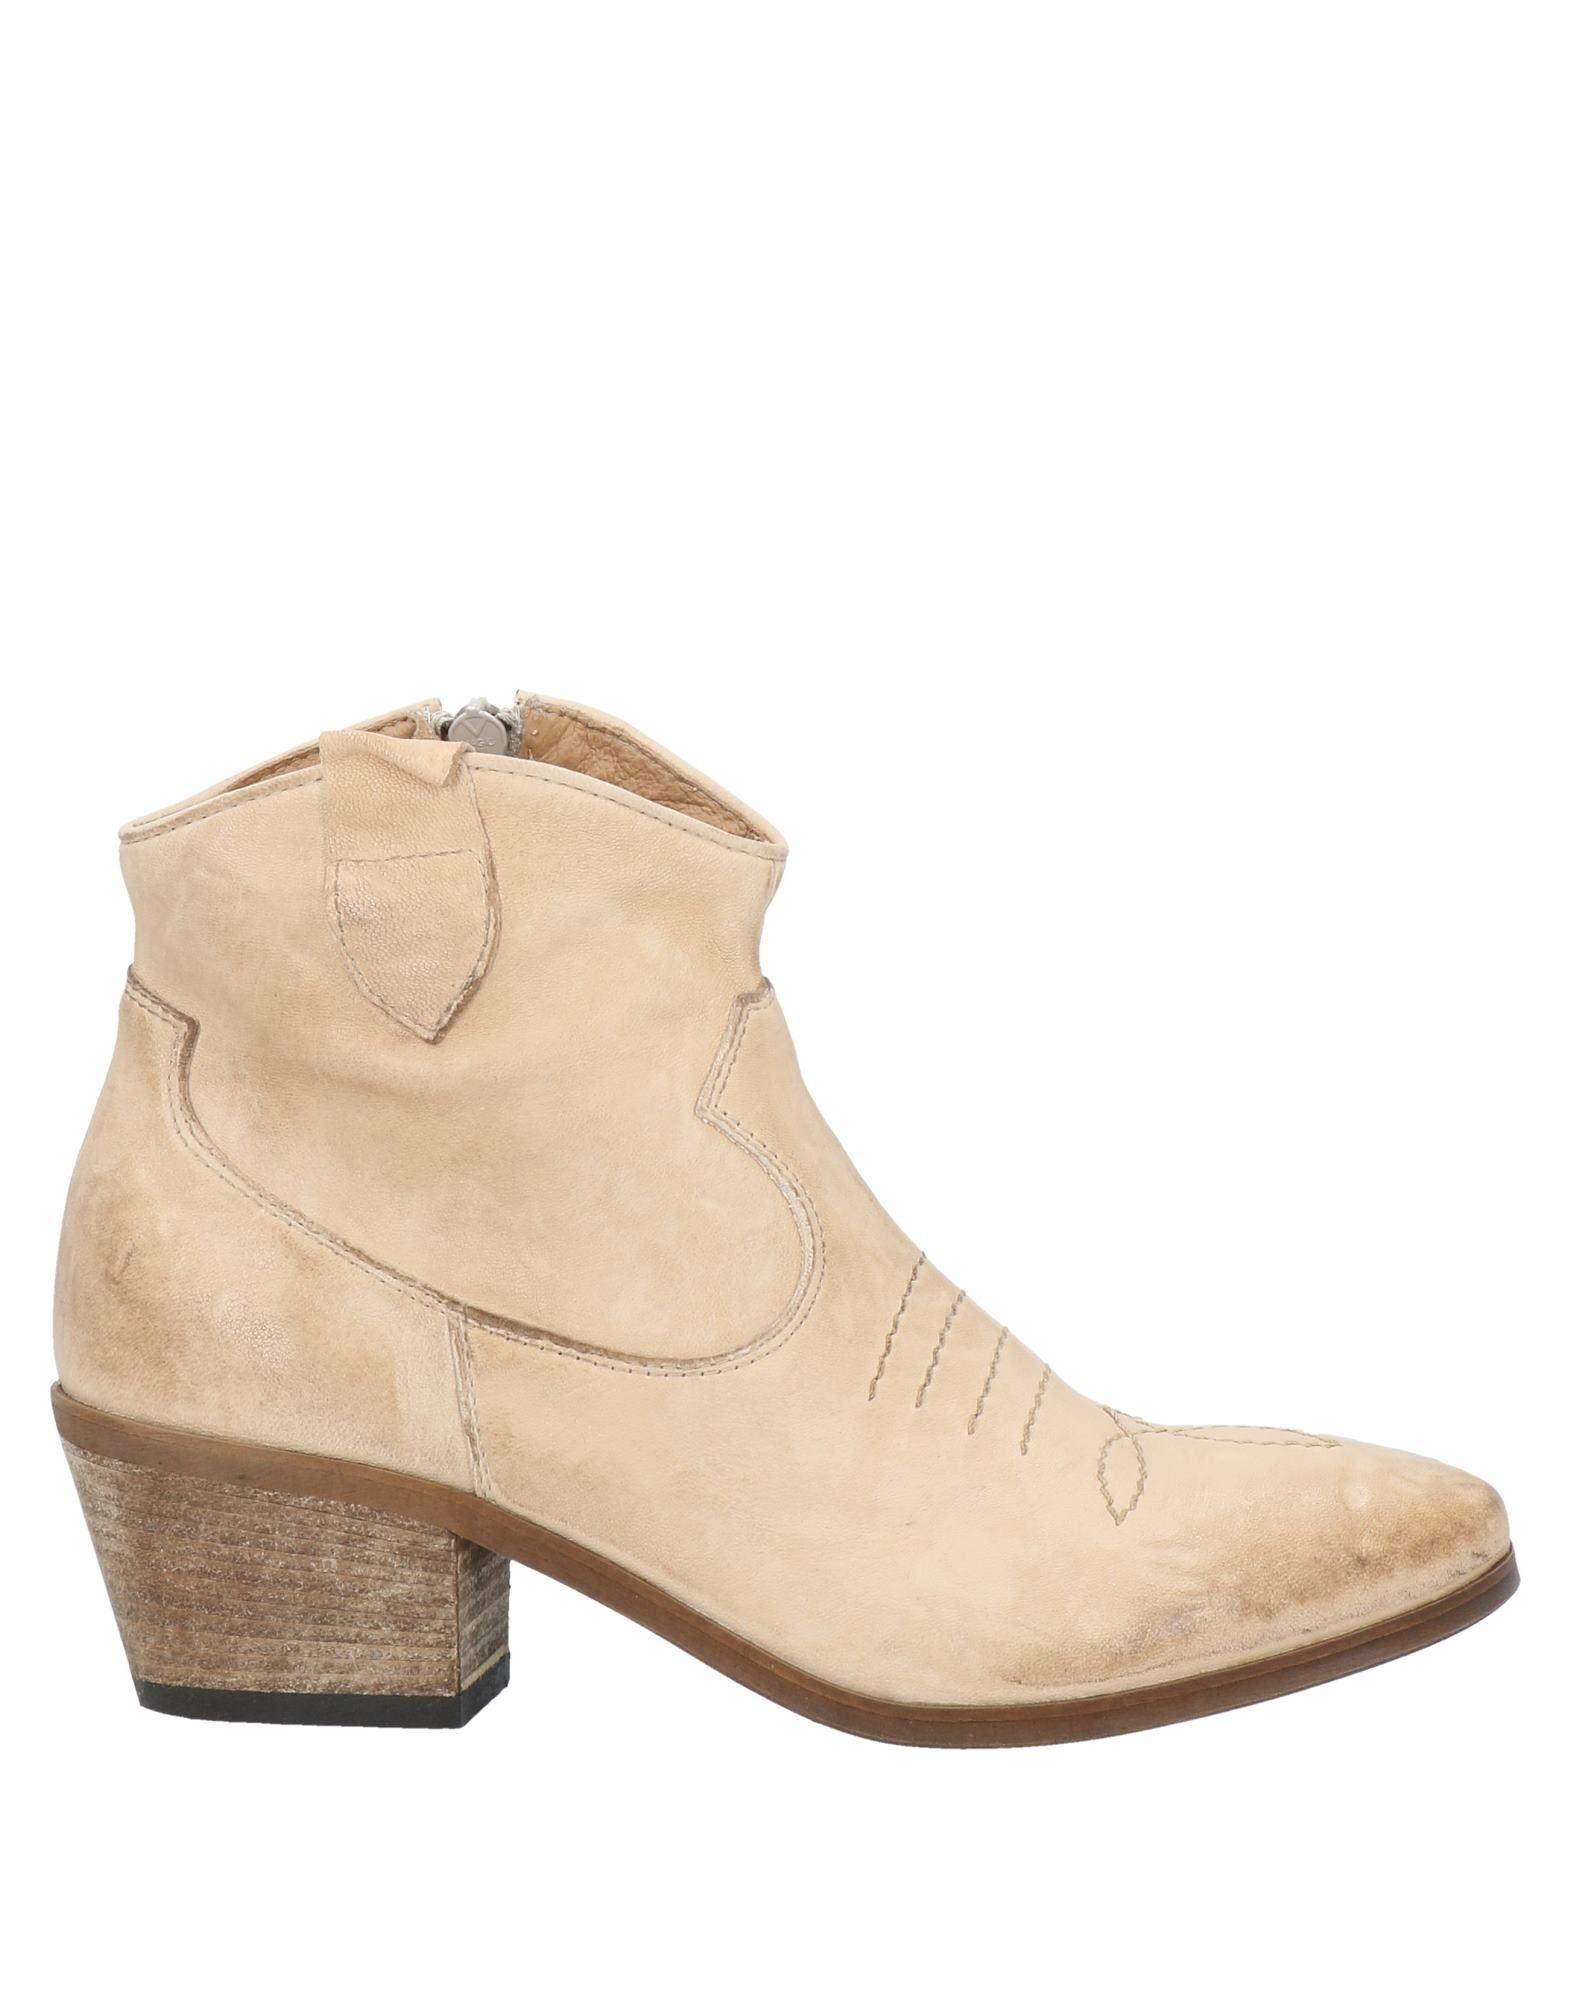 JE T'AIME Ankle Boots in Natural | Lyst